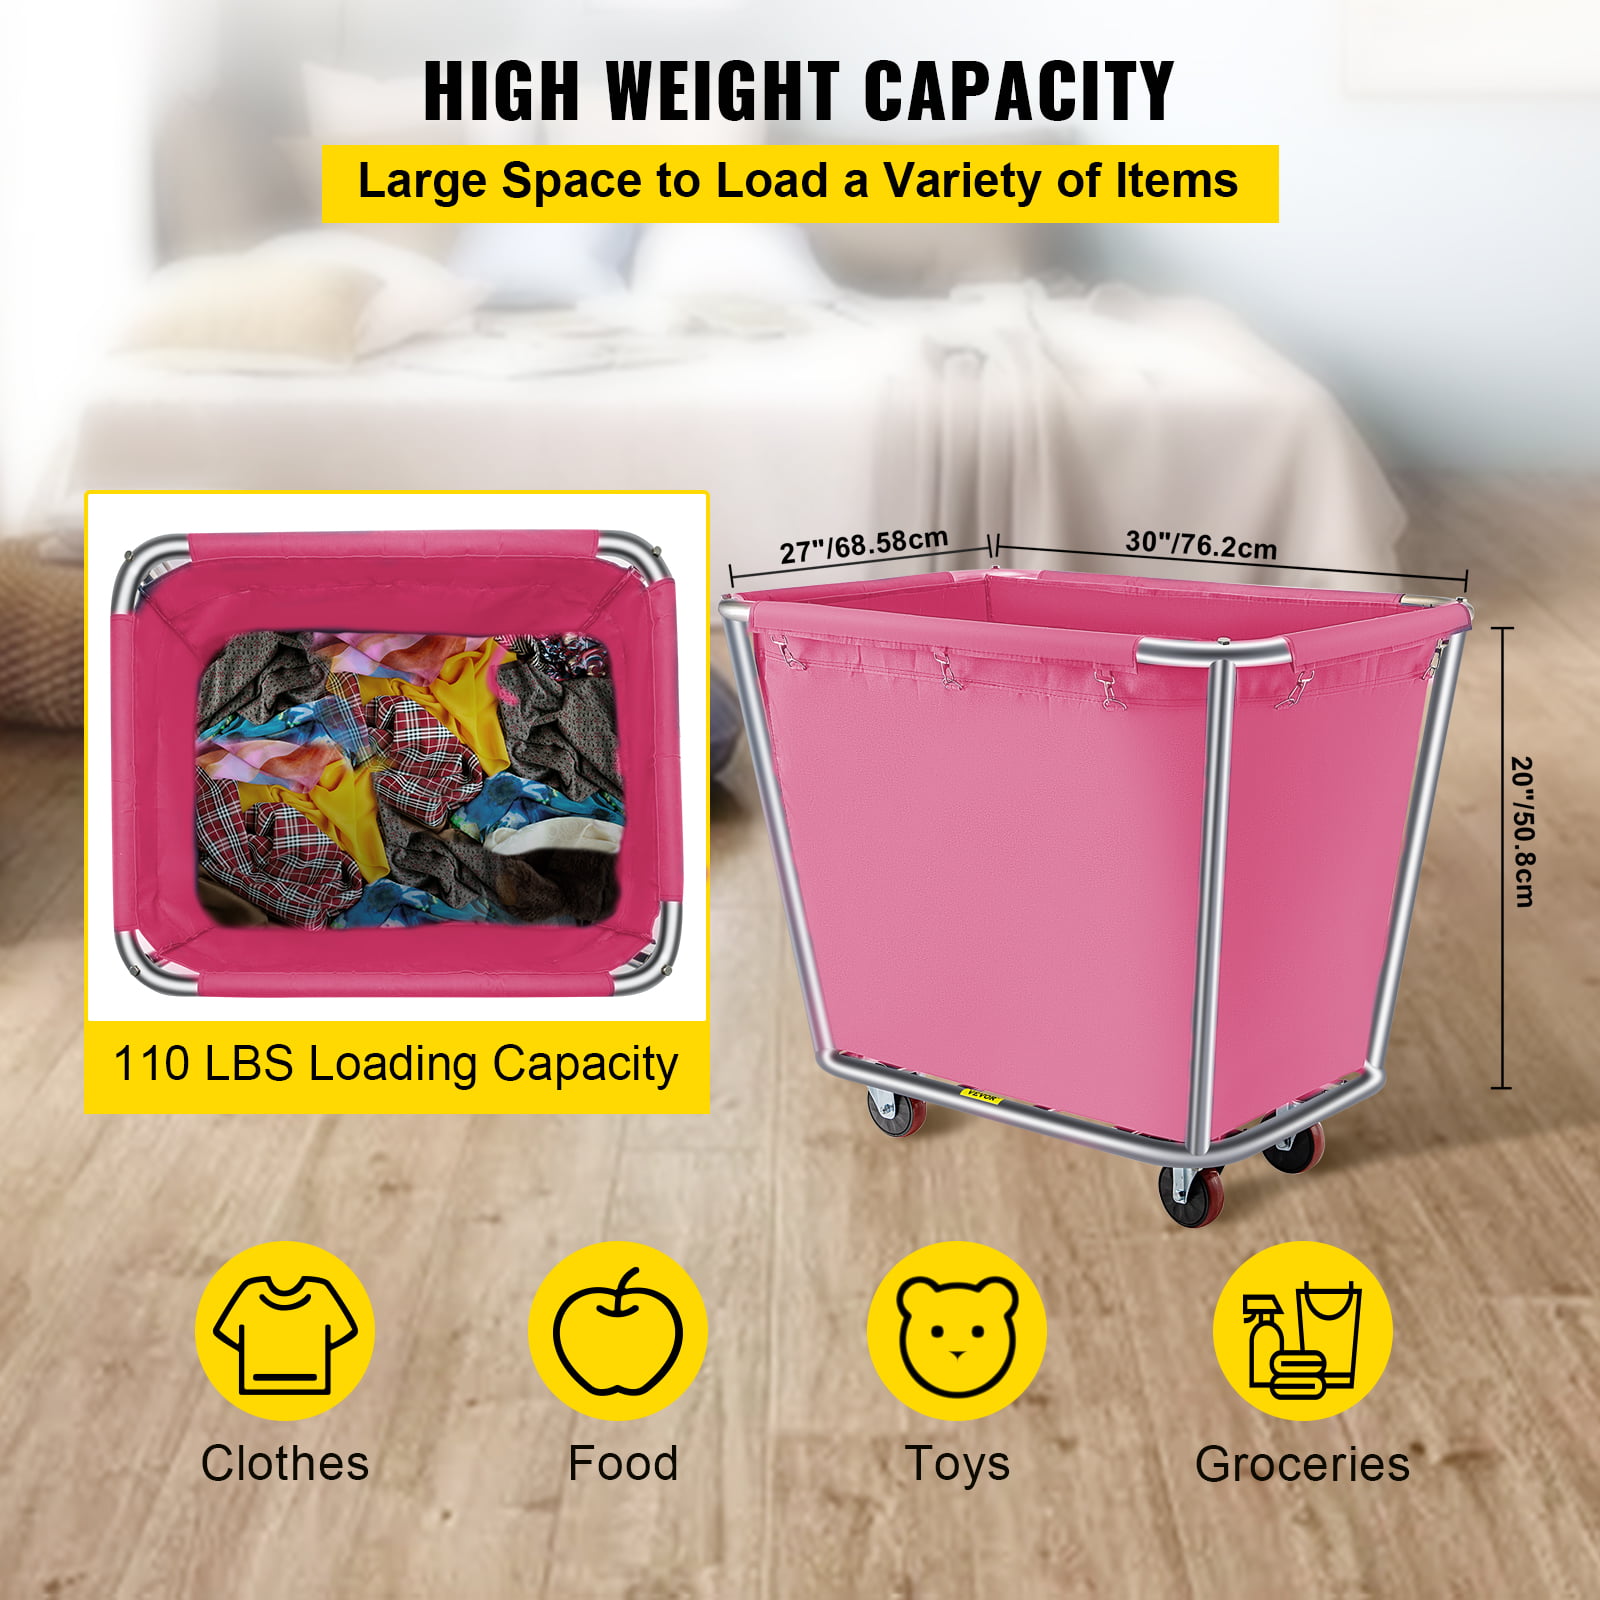 Hospital 3 Diameter Wheels Truck Cap Basket Canvas Laundry Cart Usually Used to Transport Clothes Home 10 Bushel Steel Canvas Laundry Basket VEVOR Basket Truck Store Sundries Suitable for Hotel 